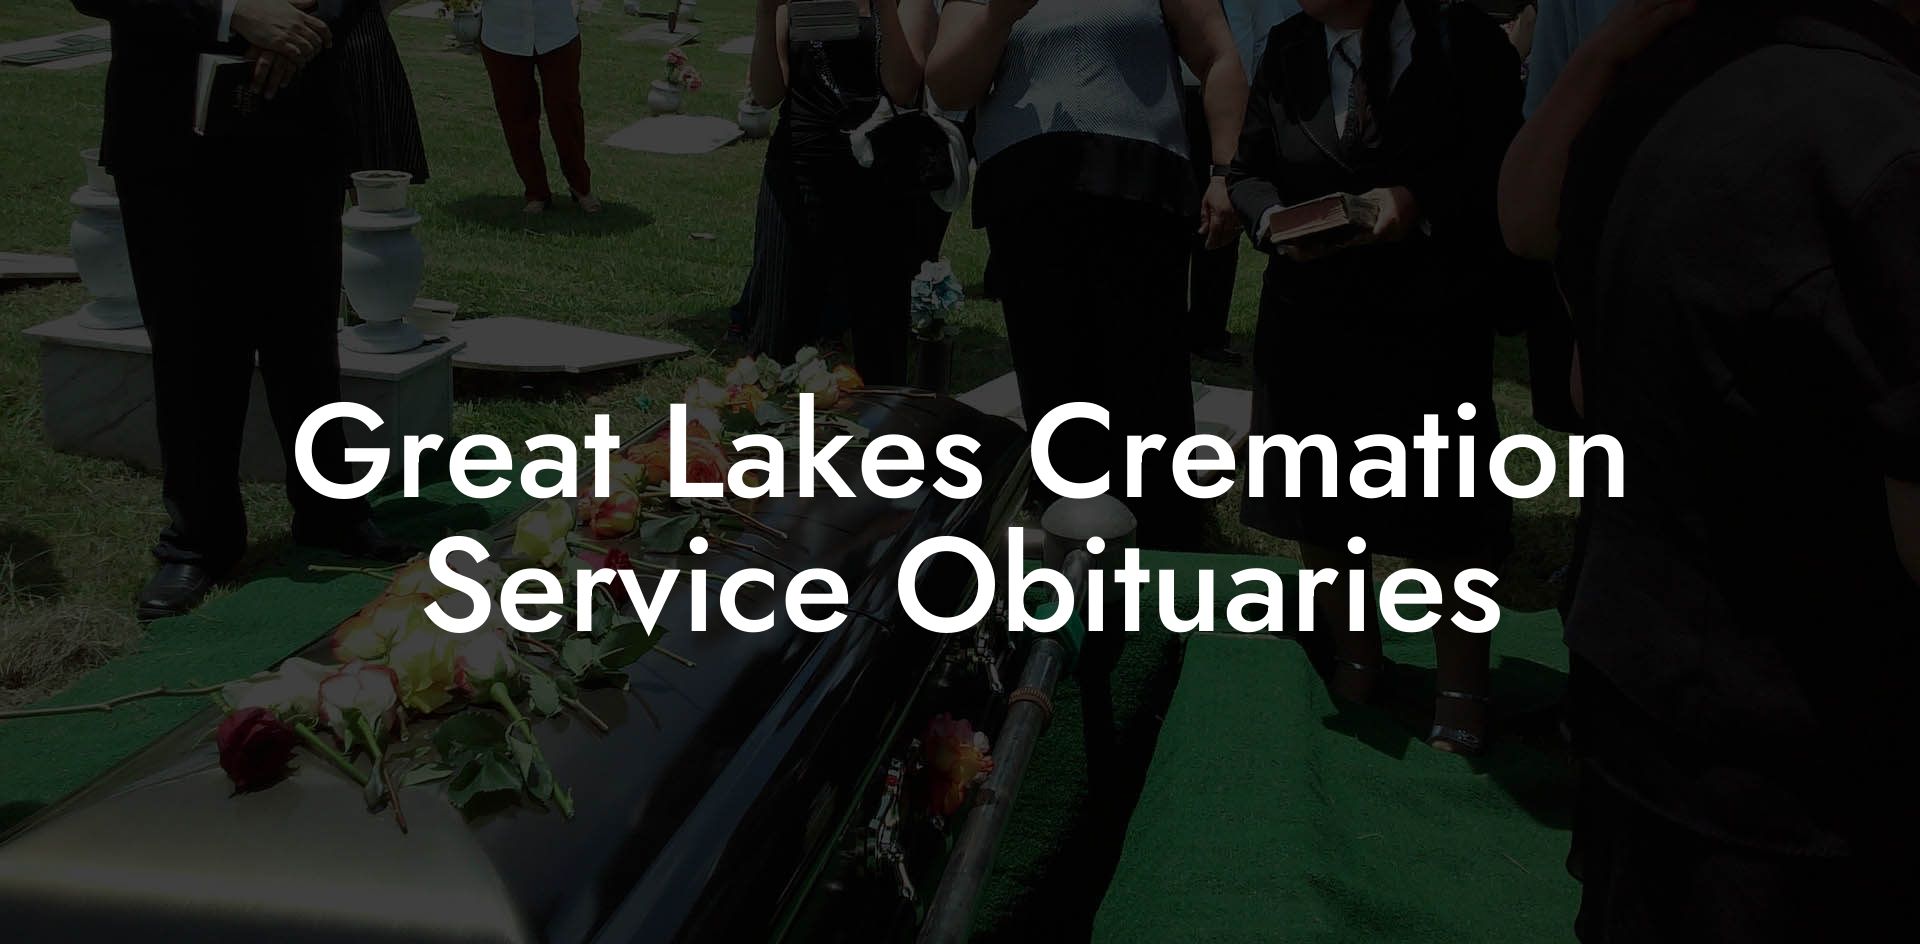 Great Lakes Cremation Service Obituaries